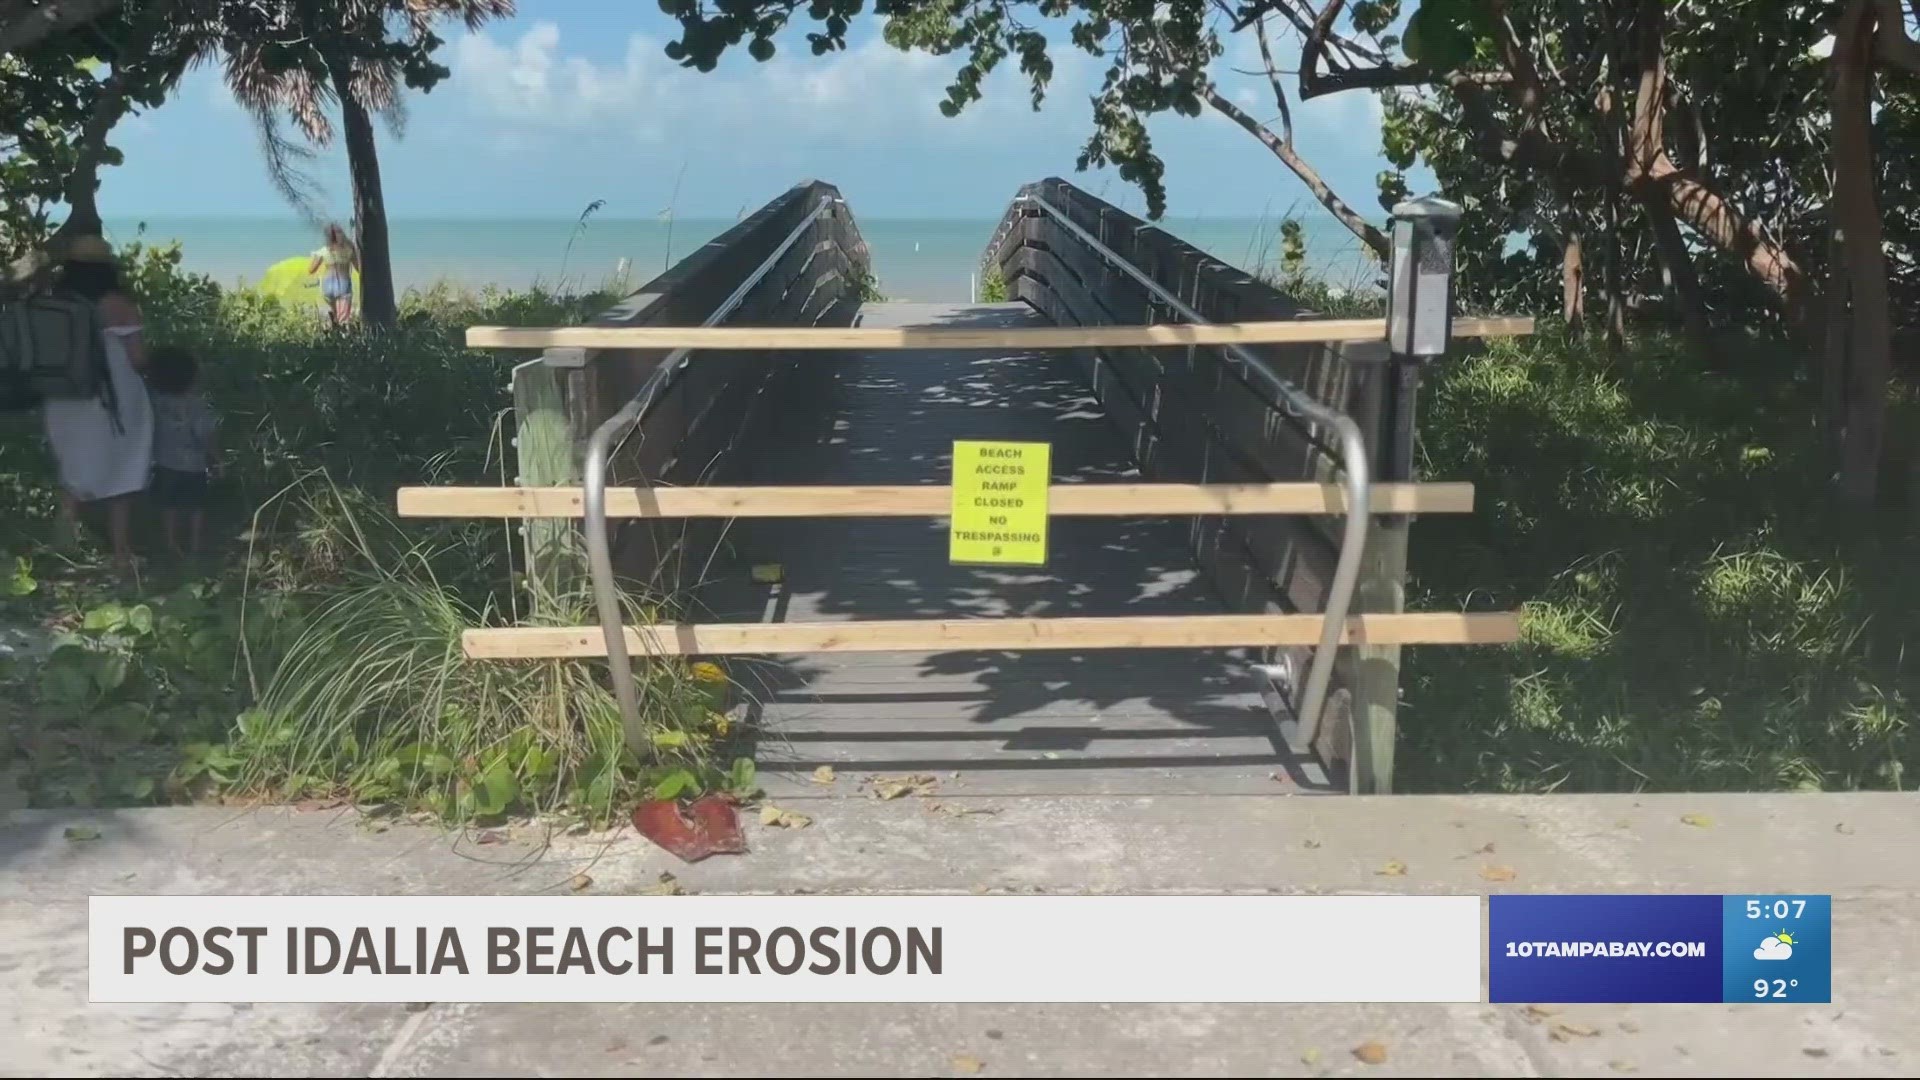 Indian Rocks Beach city leaders estimate it will take about $600,000 to replenish the beaches.